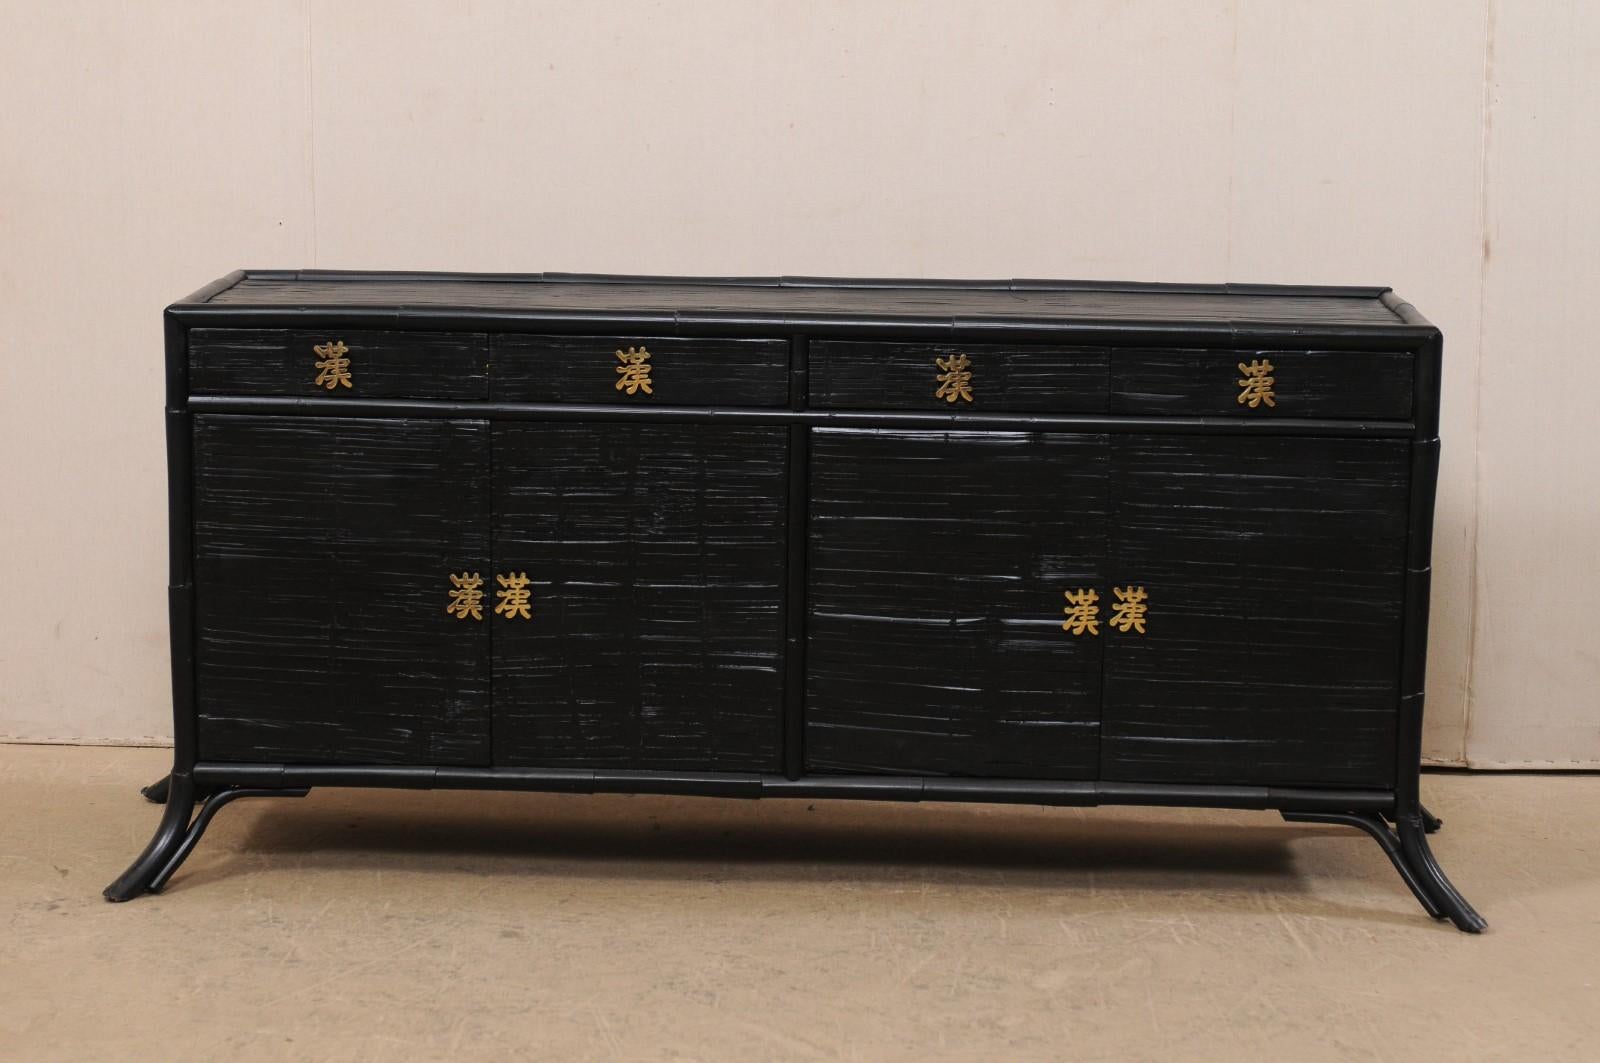 A vintage American painted bamboo reed buffet console. This American sideboard, inspired with modern design elements, is just over 6 feet in length, and features a rectangular-shaped case, with four small drawers just beneath it's top, and two pairs